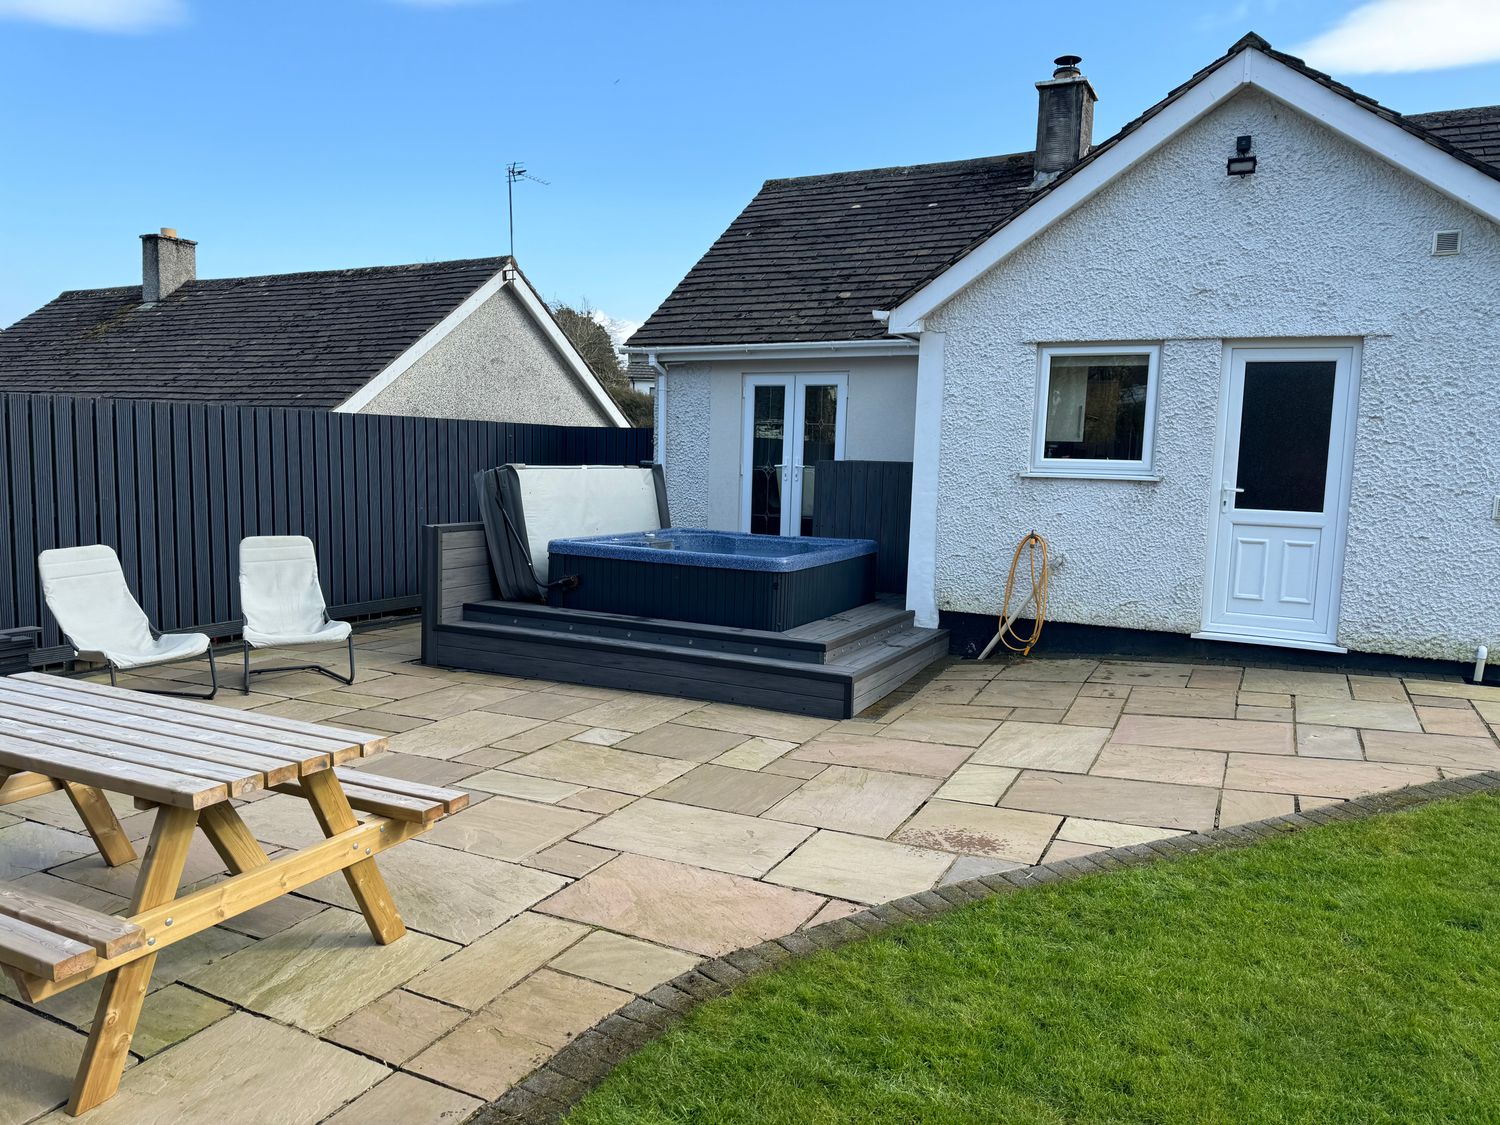 80 Breeze Hill, Benllech, Anglesey, pet-friendly hot tub, close to beach and amenities, contemporary